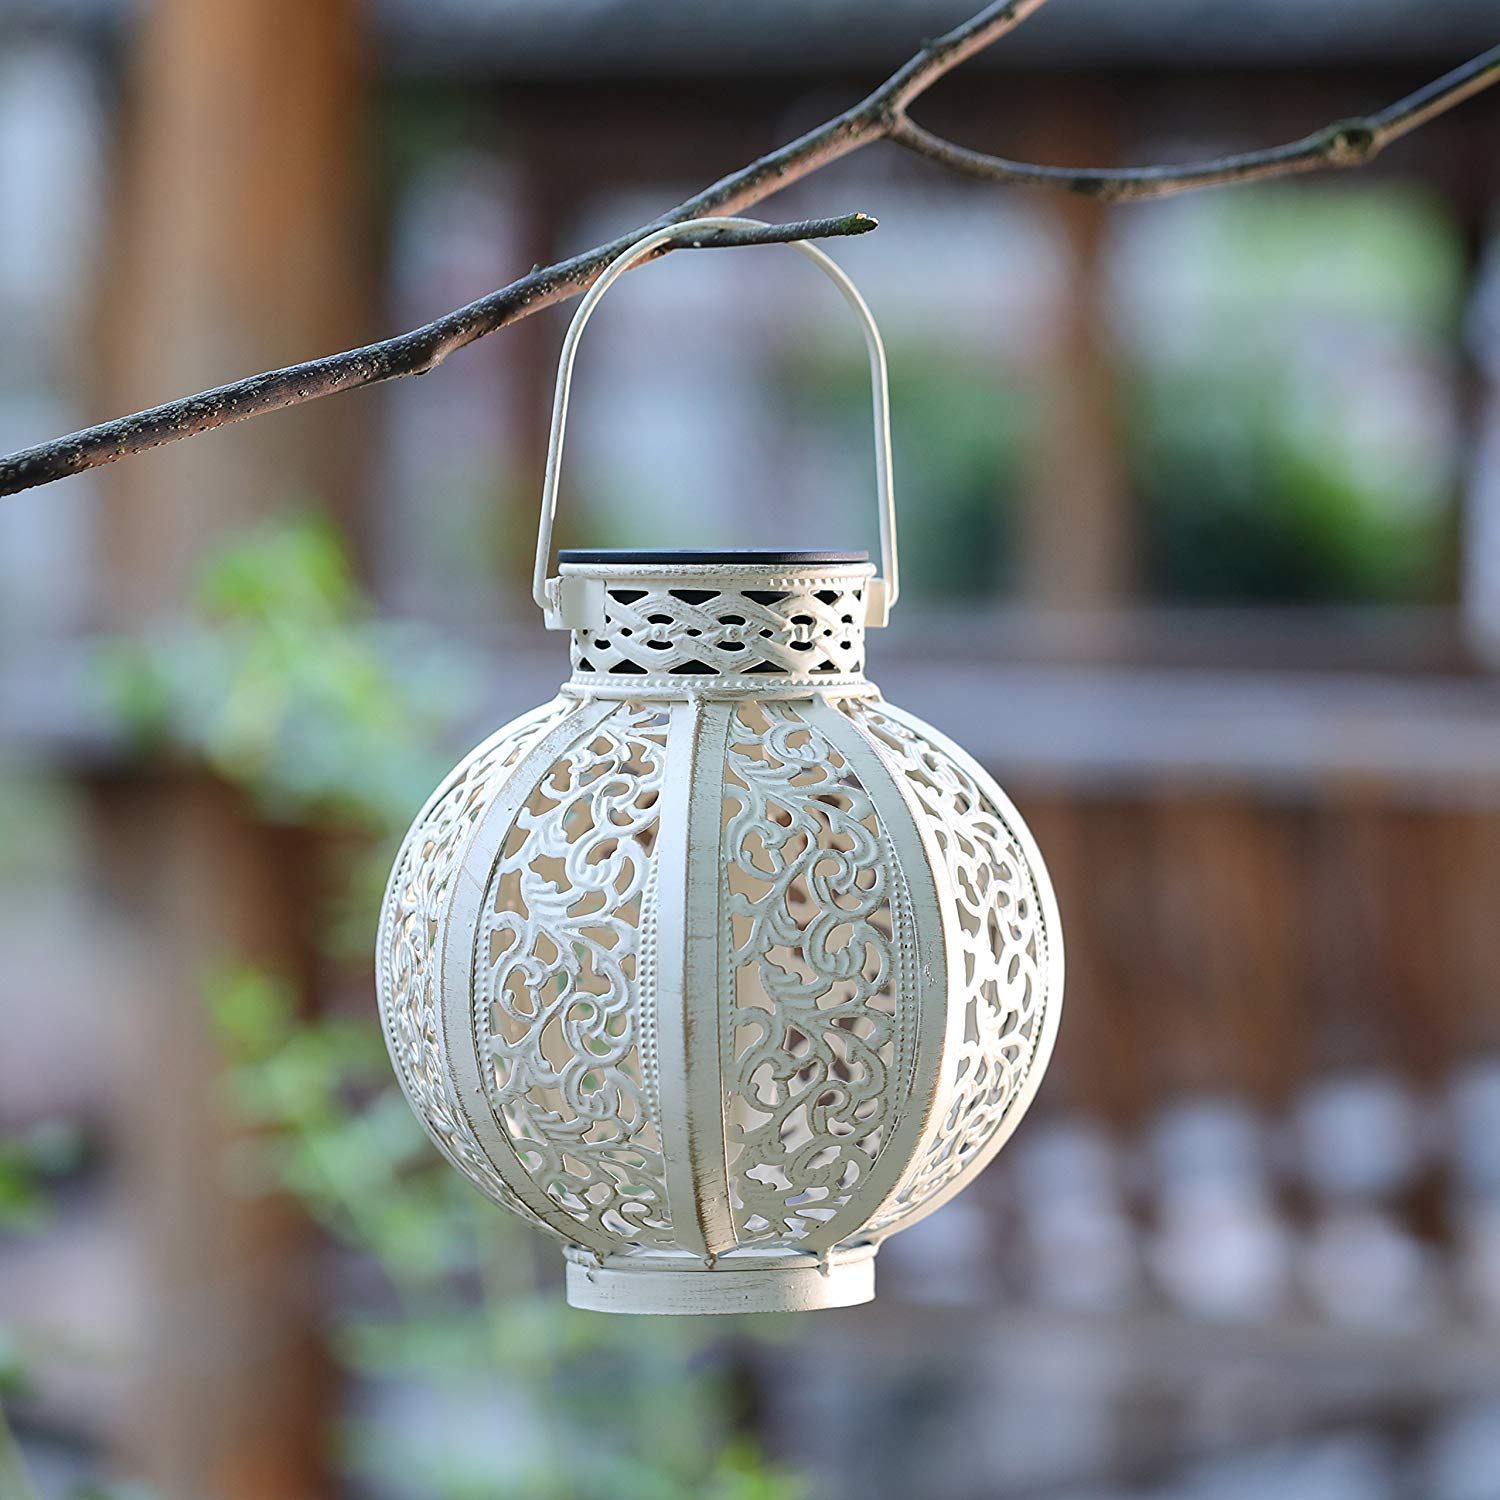 12 Solar-Powered Landscape Lights You Haven't Seen Before